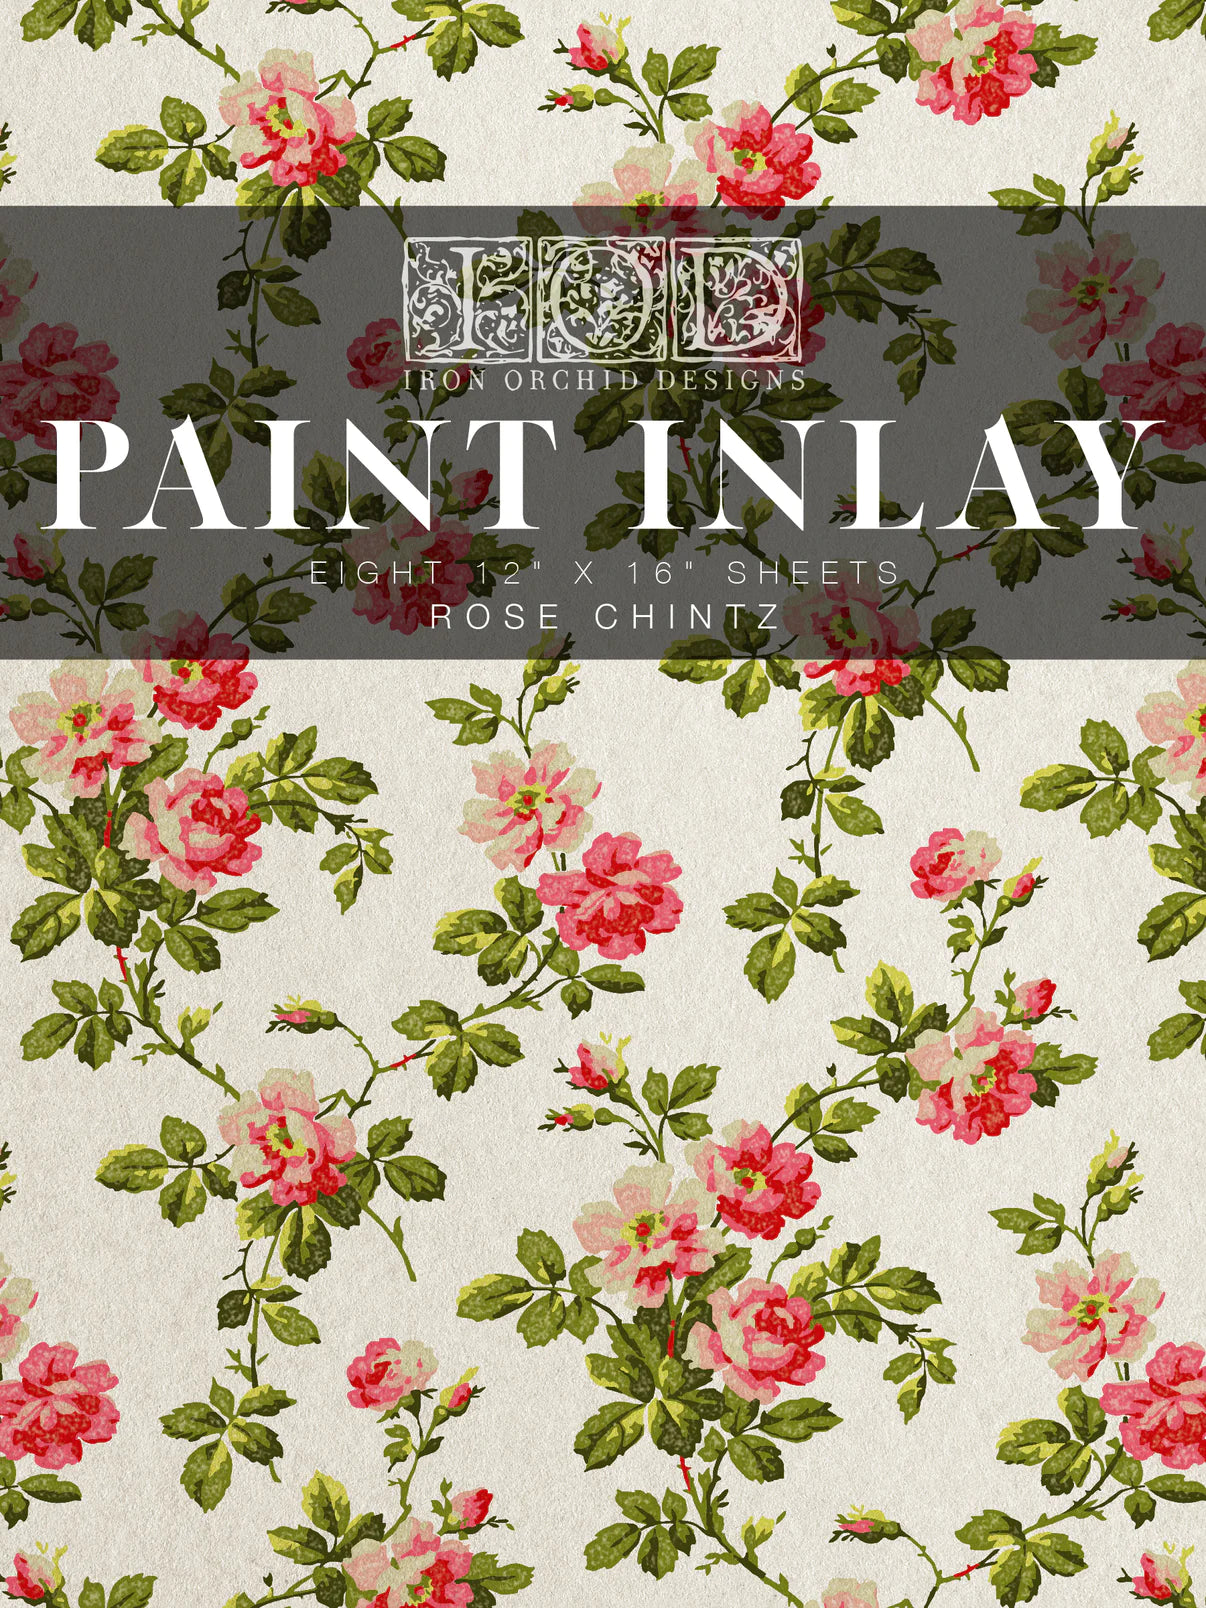 Iron Orchid Designs Rose Chintz | IOD Paint Inlay